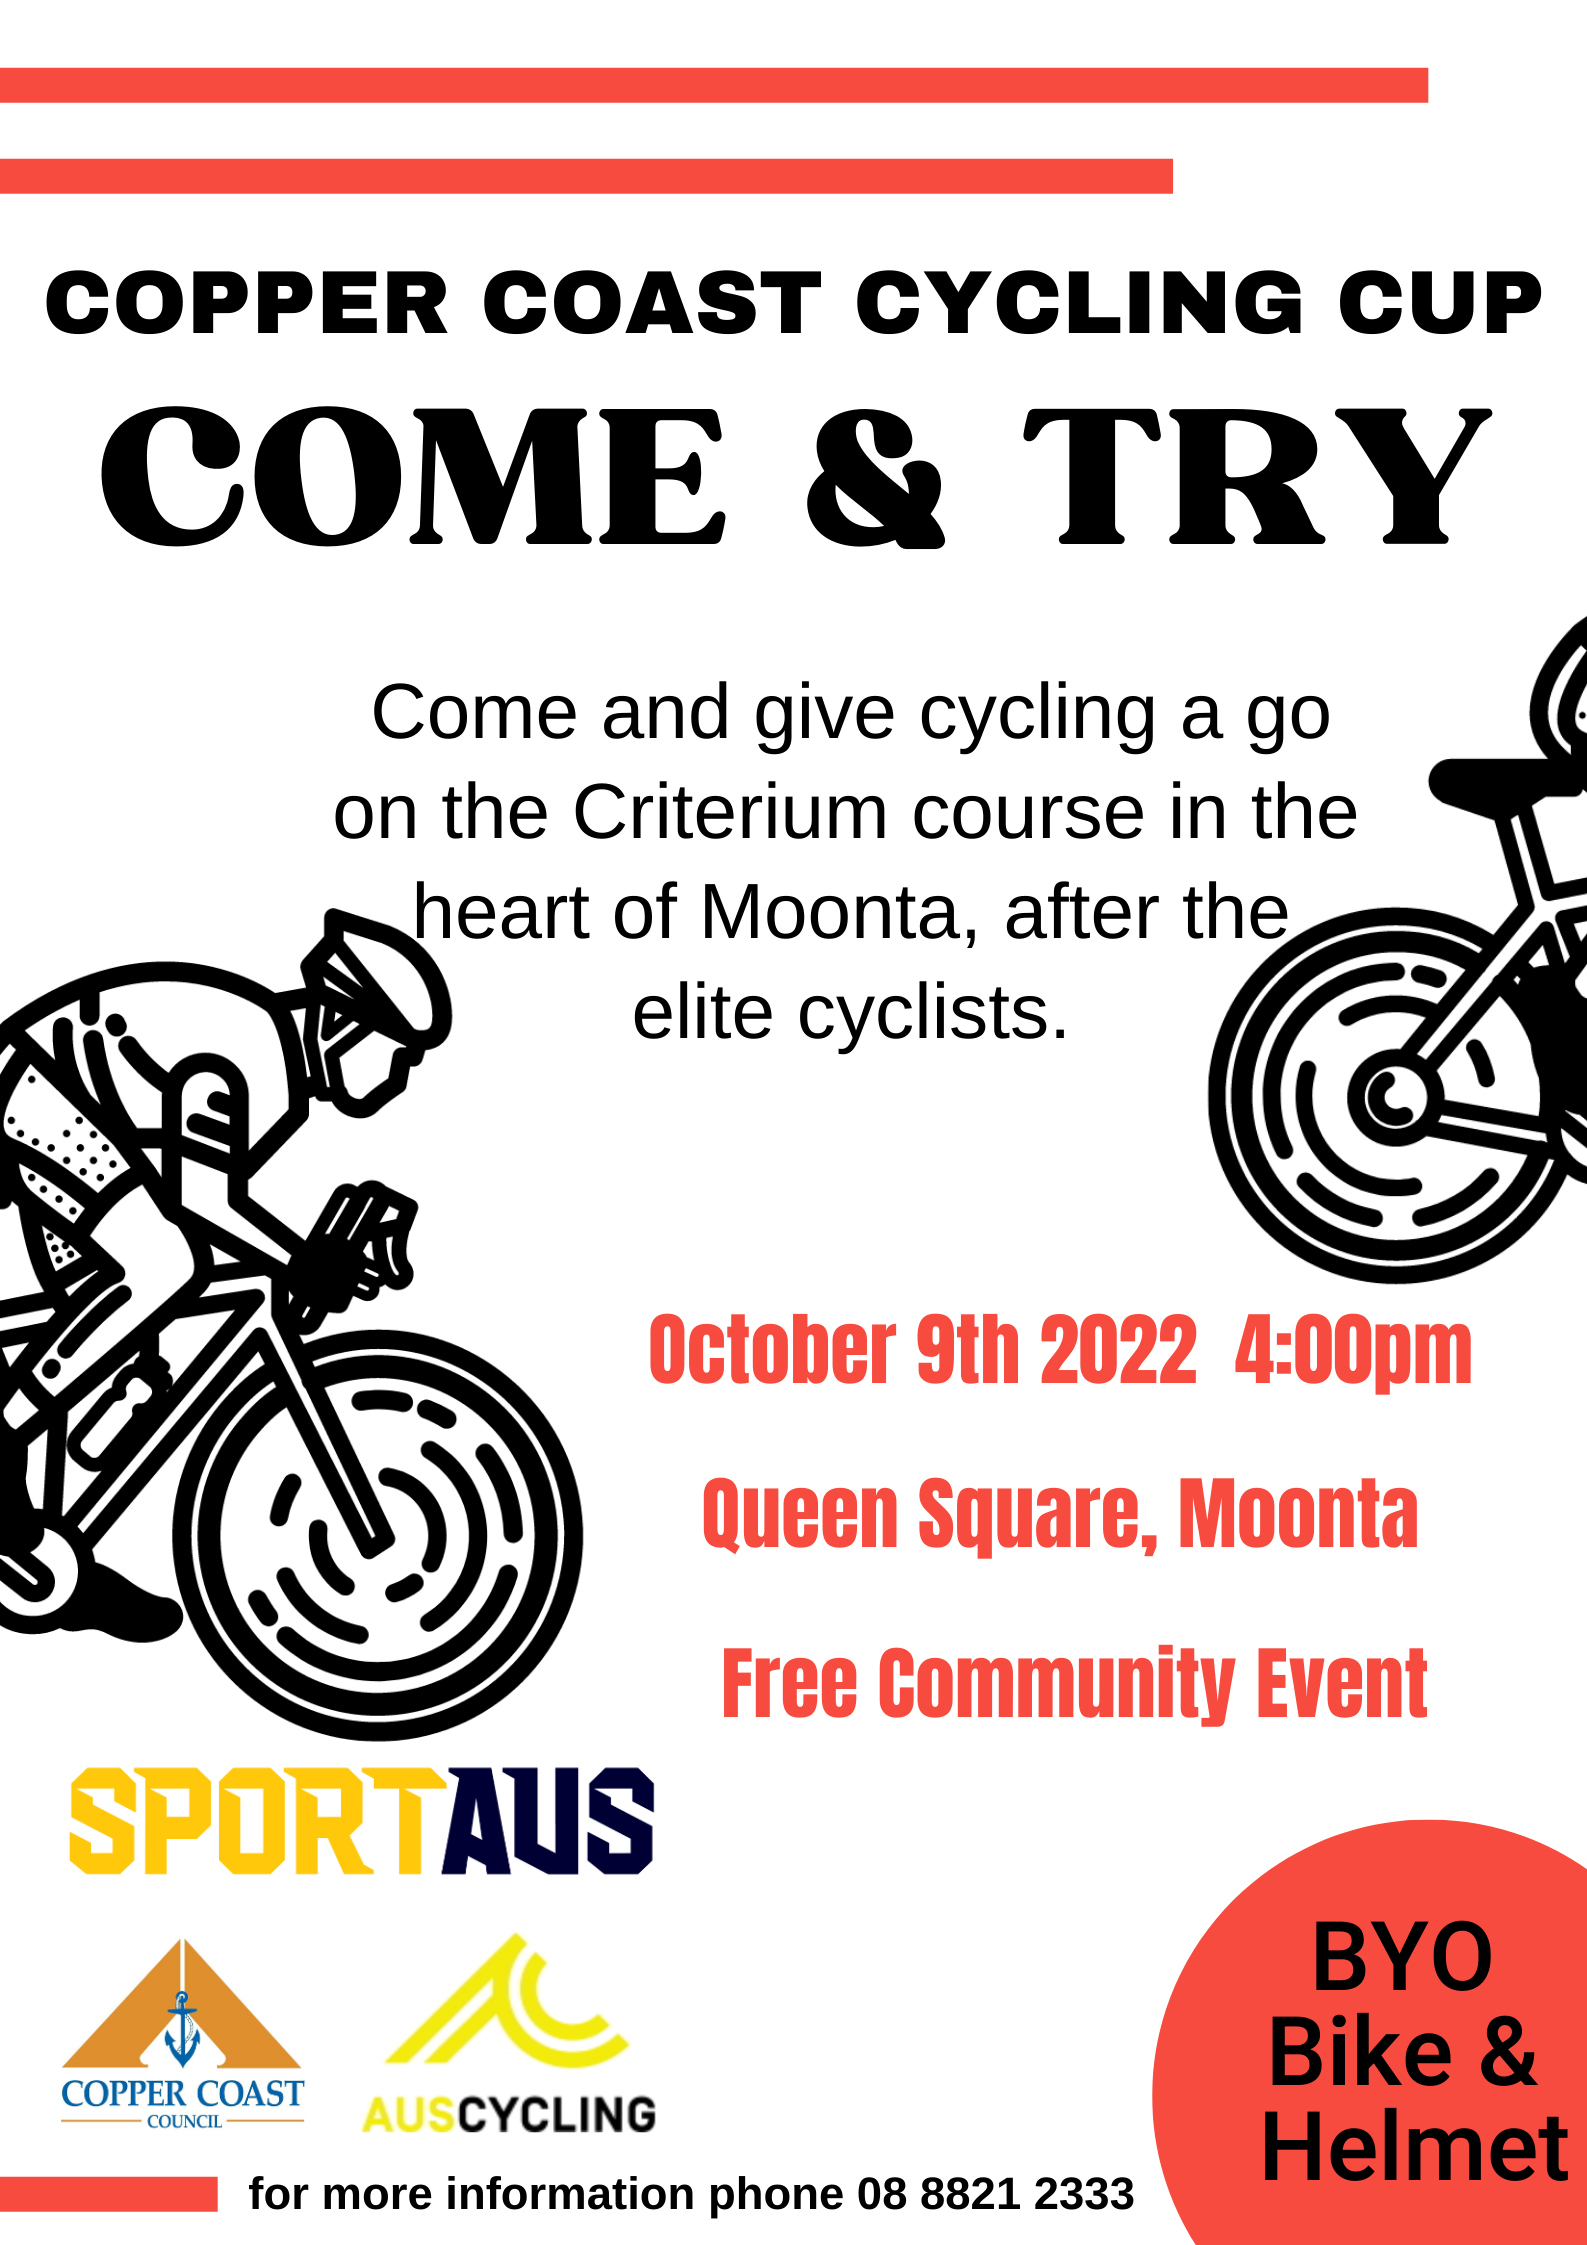 Copper Coast Come & Try. Sunday, 9 October at 4pm. Free Community Event. Race around Queen Square on Criterium course. BYO Bike and Helmet. Call 8821 2333 for more details